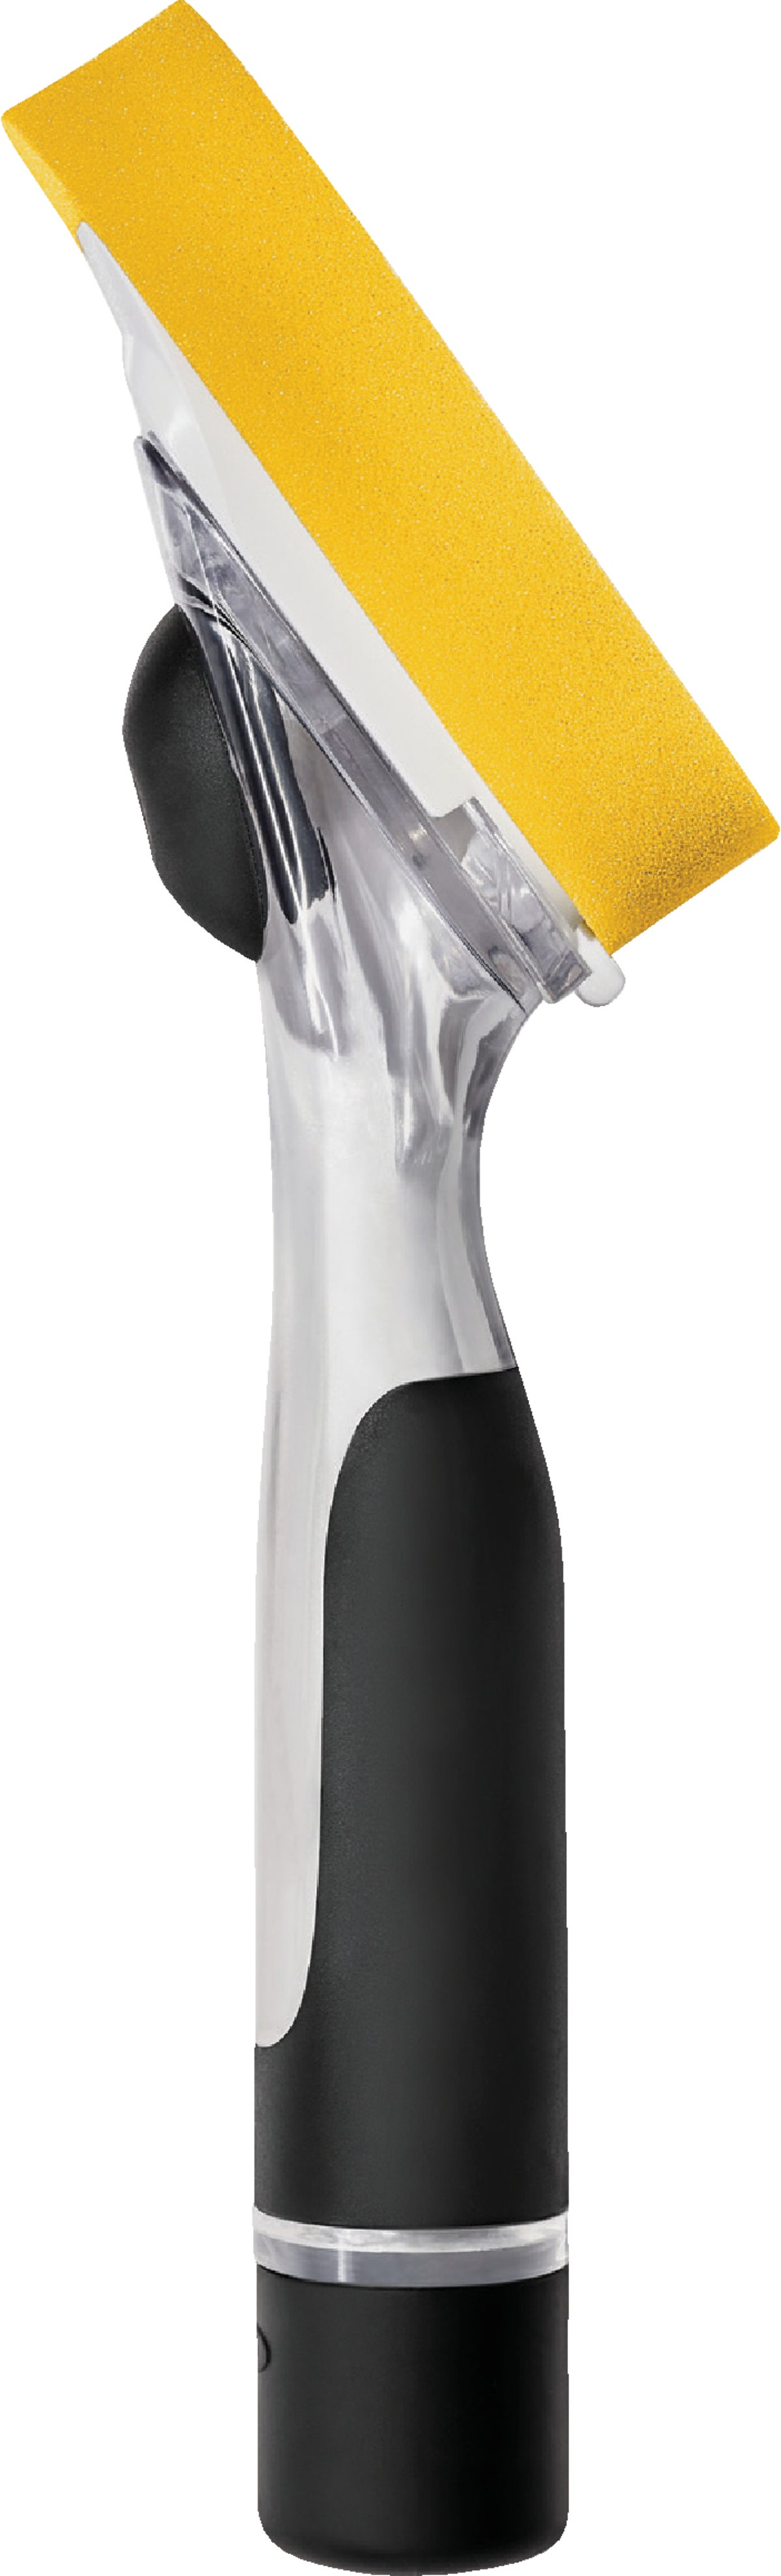 OXO - Good Grips Soap Dispensing Palm Brush – Kitchen Store & More